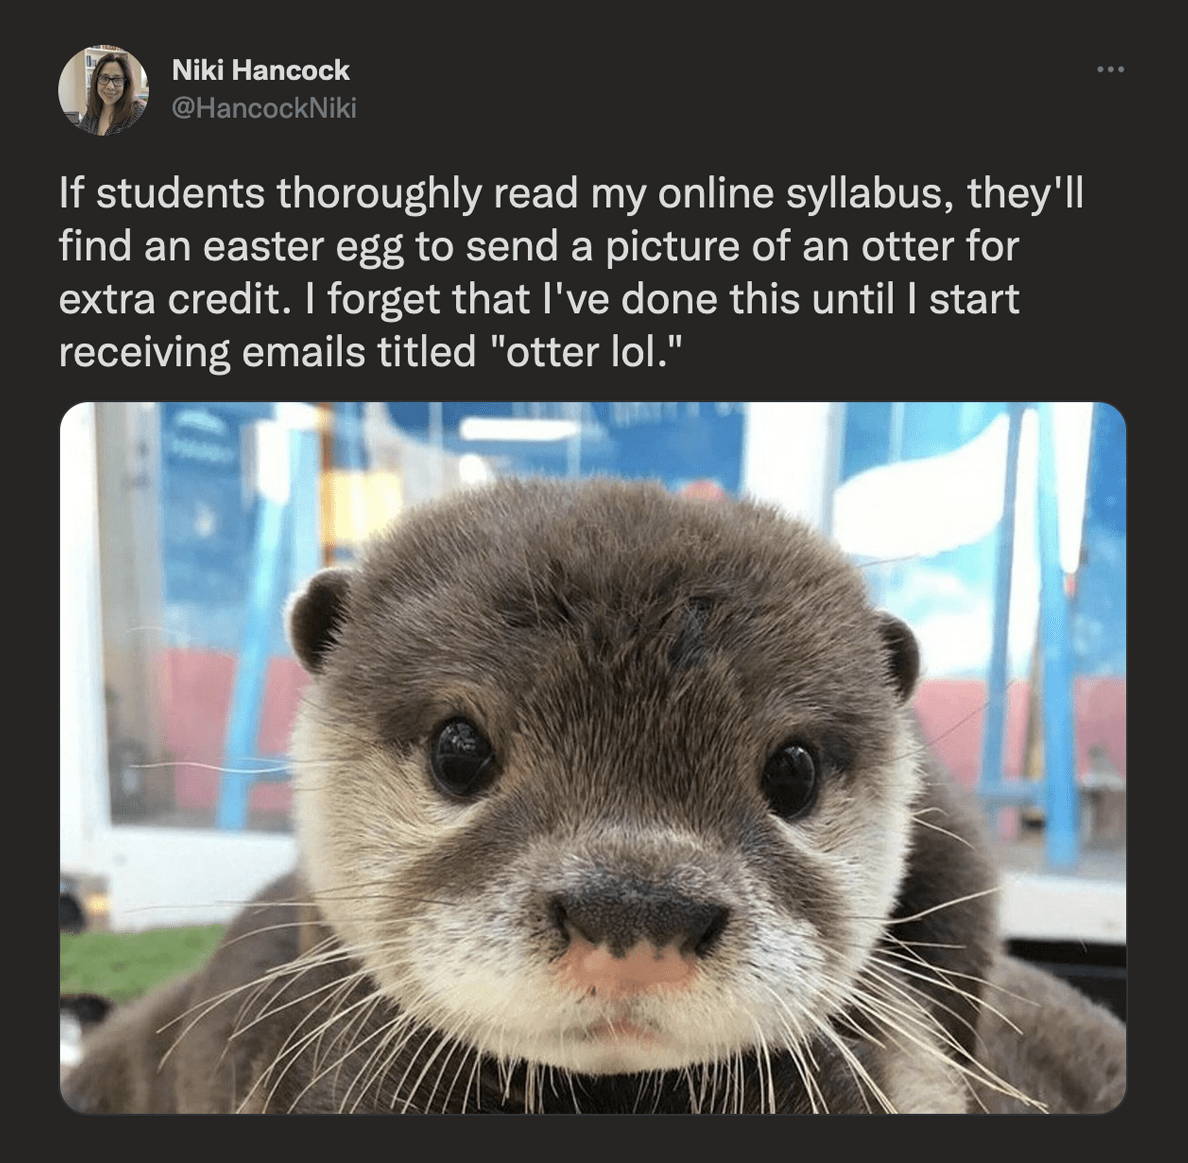 @HancockNiki on Twitter: If students thoroughly read my online syllabus, they'll find an easter egg to send a picture of an otter for extra credit. I forget that I've done this until I start receiving emails titled 'otter lol.'